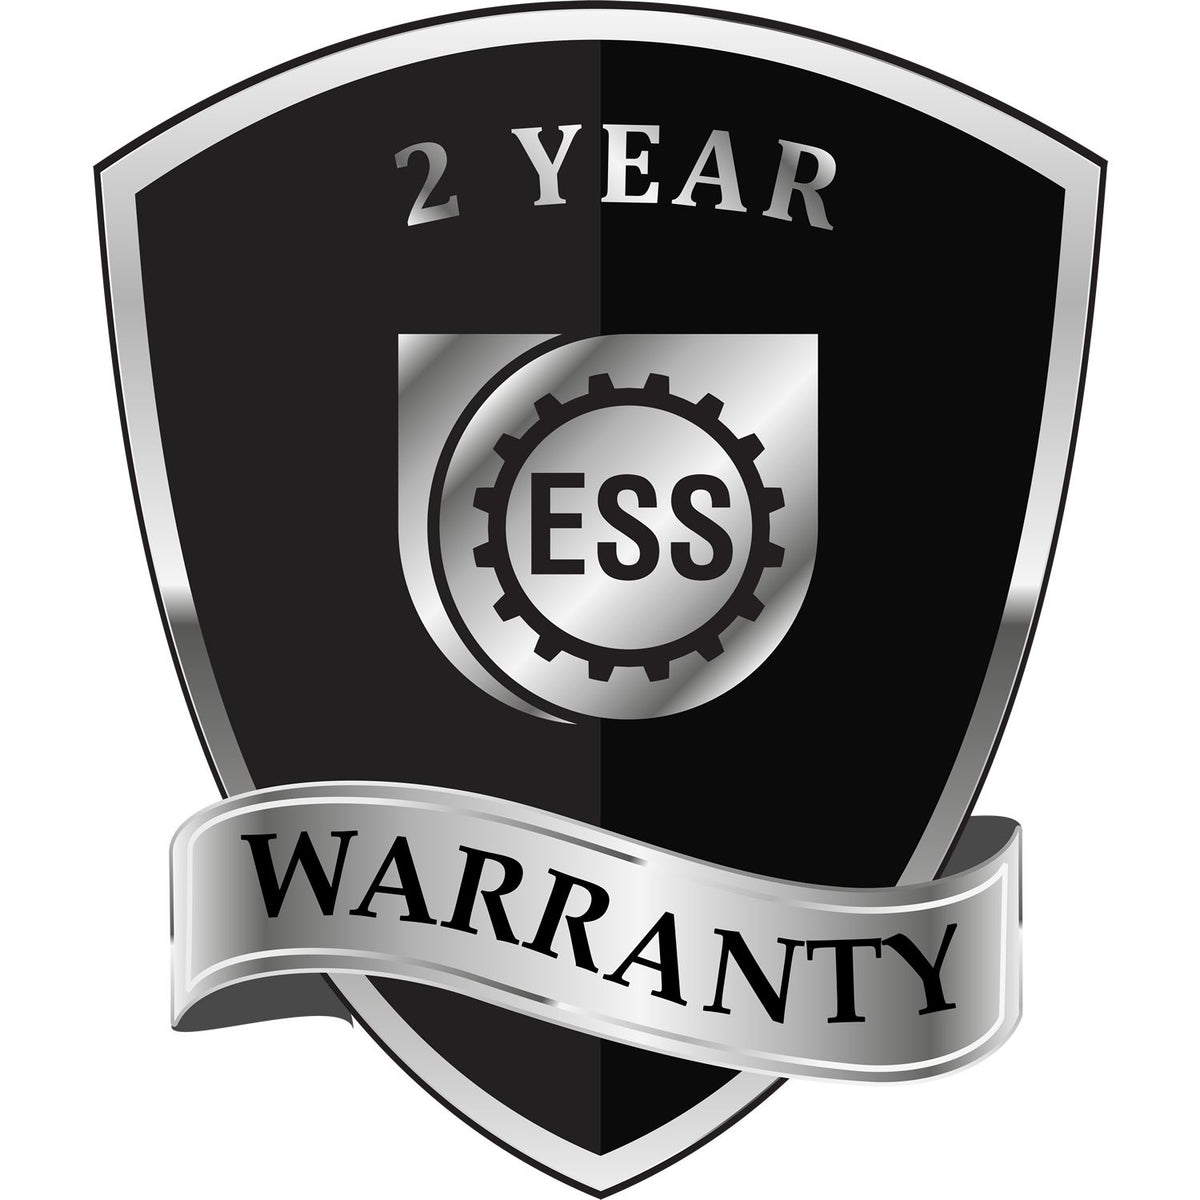 A badge or emblem showing a warranty icon for the Soft Louisiana Professional Engineer Seal